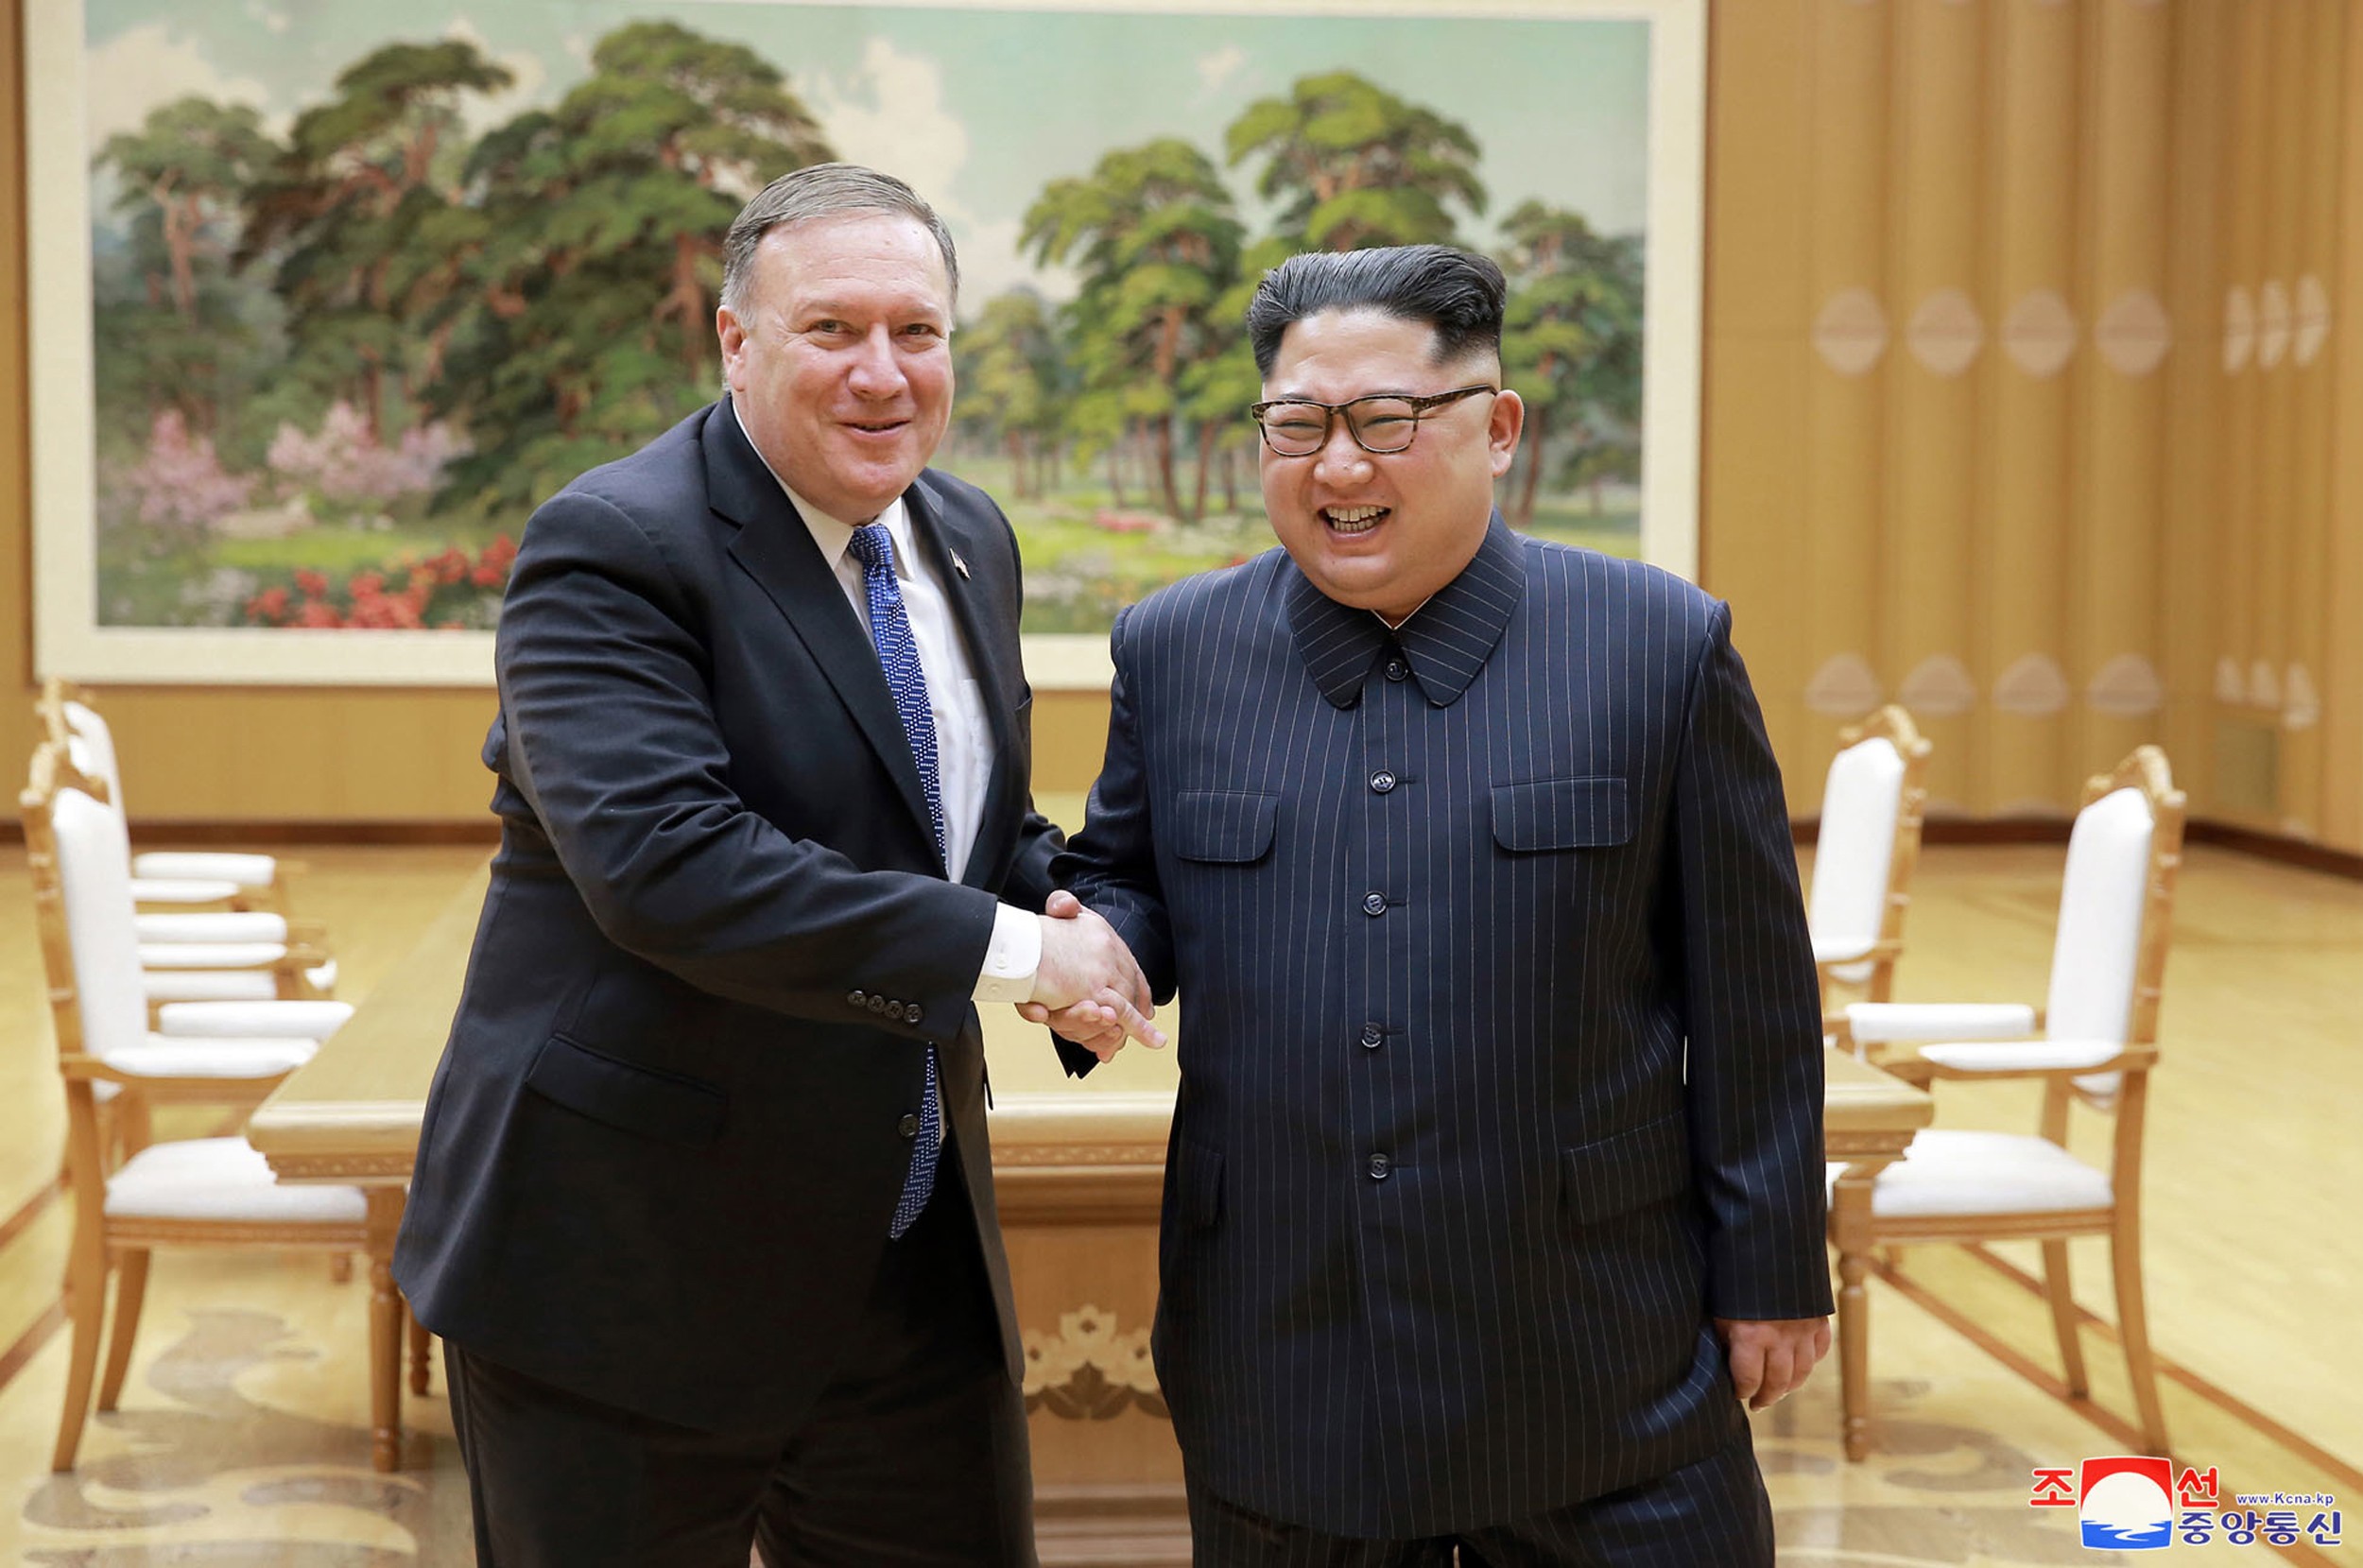 US Secretary of State Mike Pompeo with North Korean leader Kim Jong-un. Photo: AP